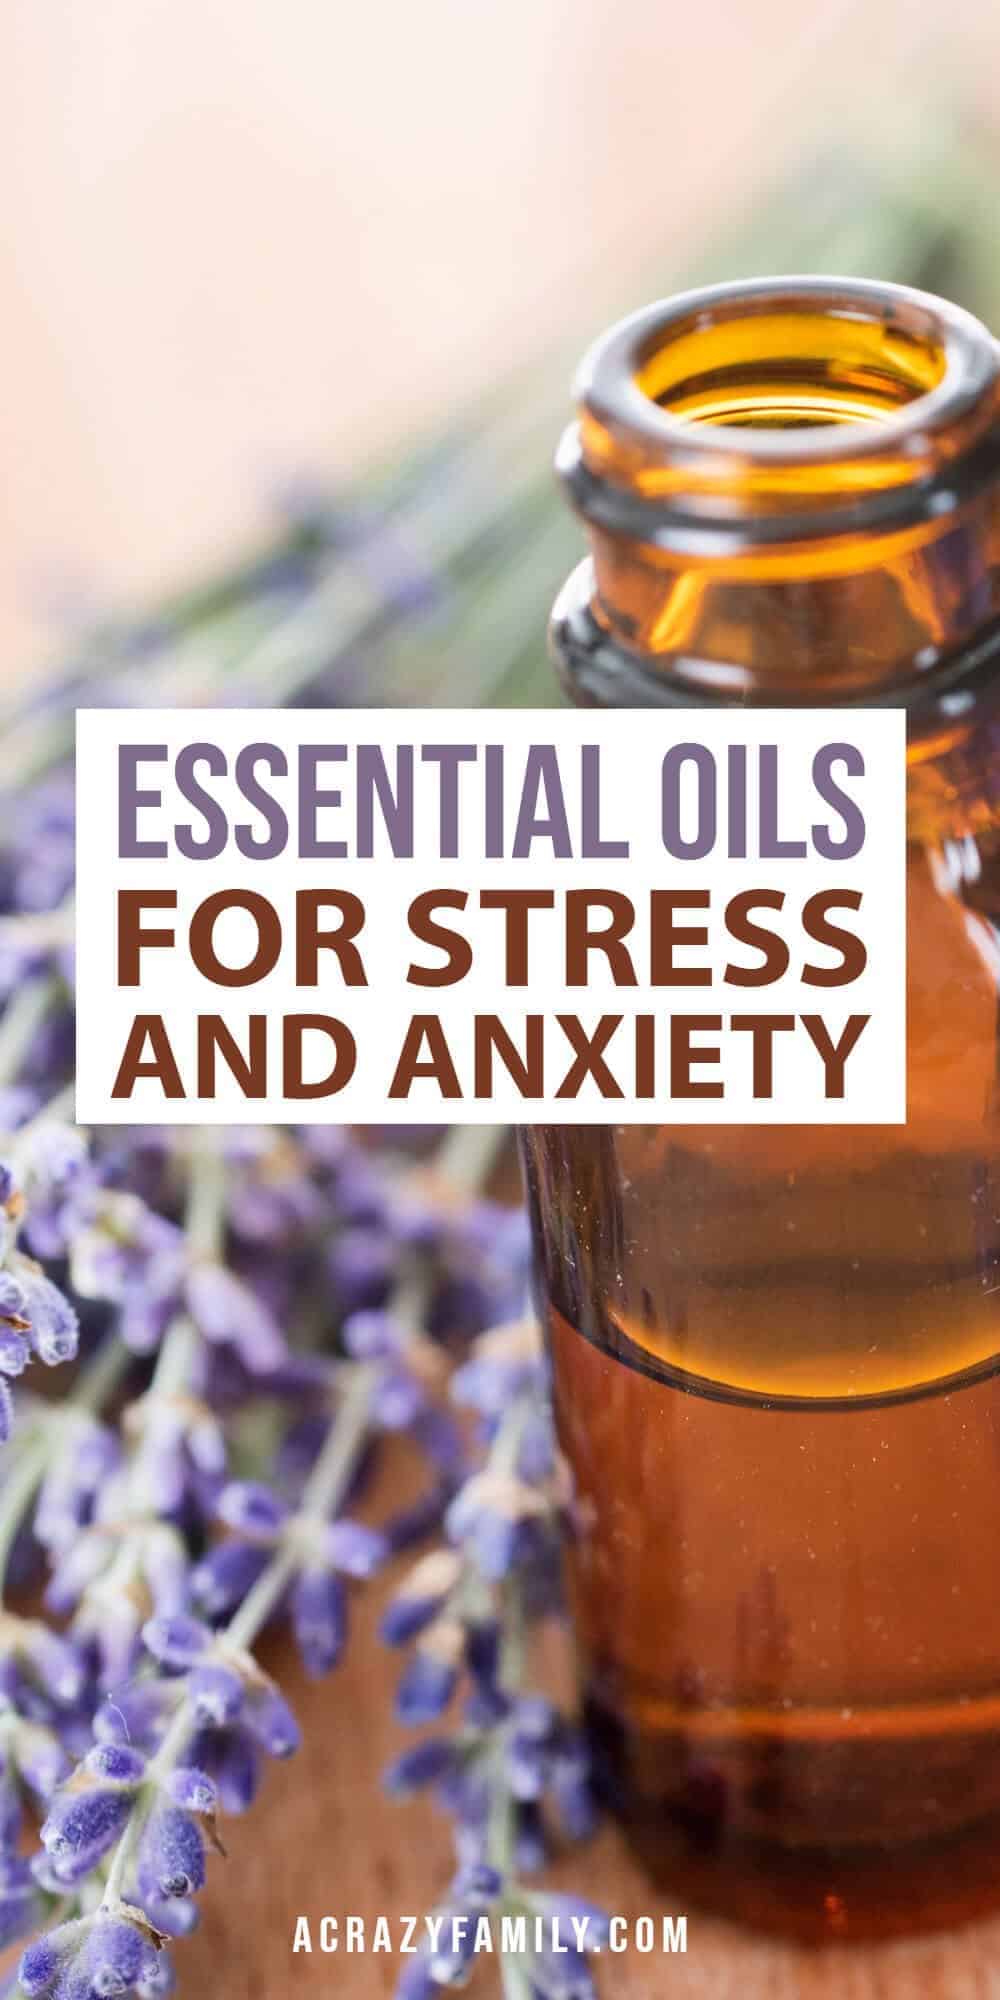 Essential Oils For Stress and Anxiety